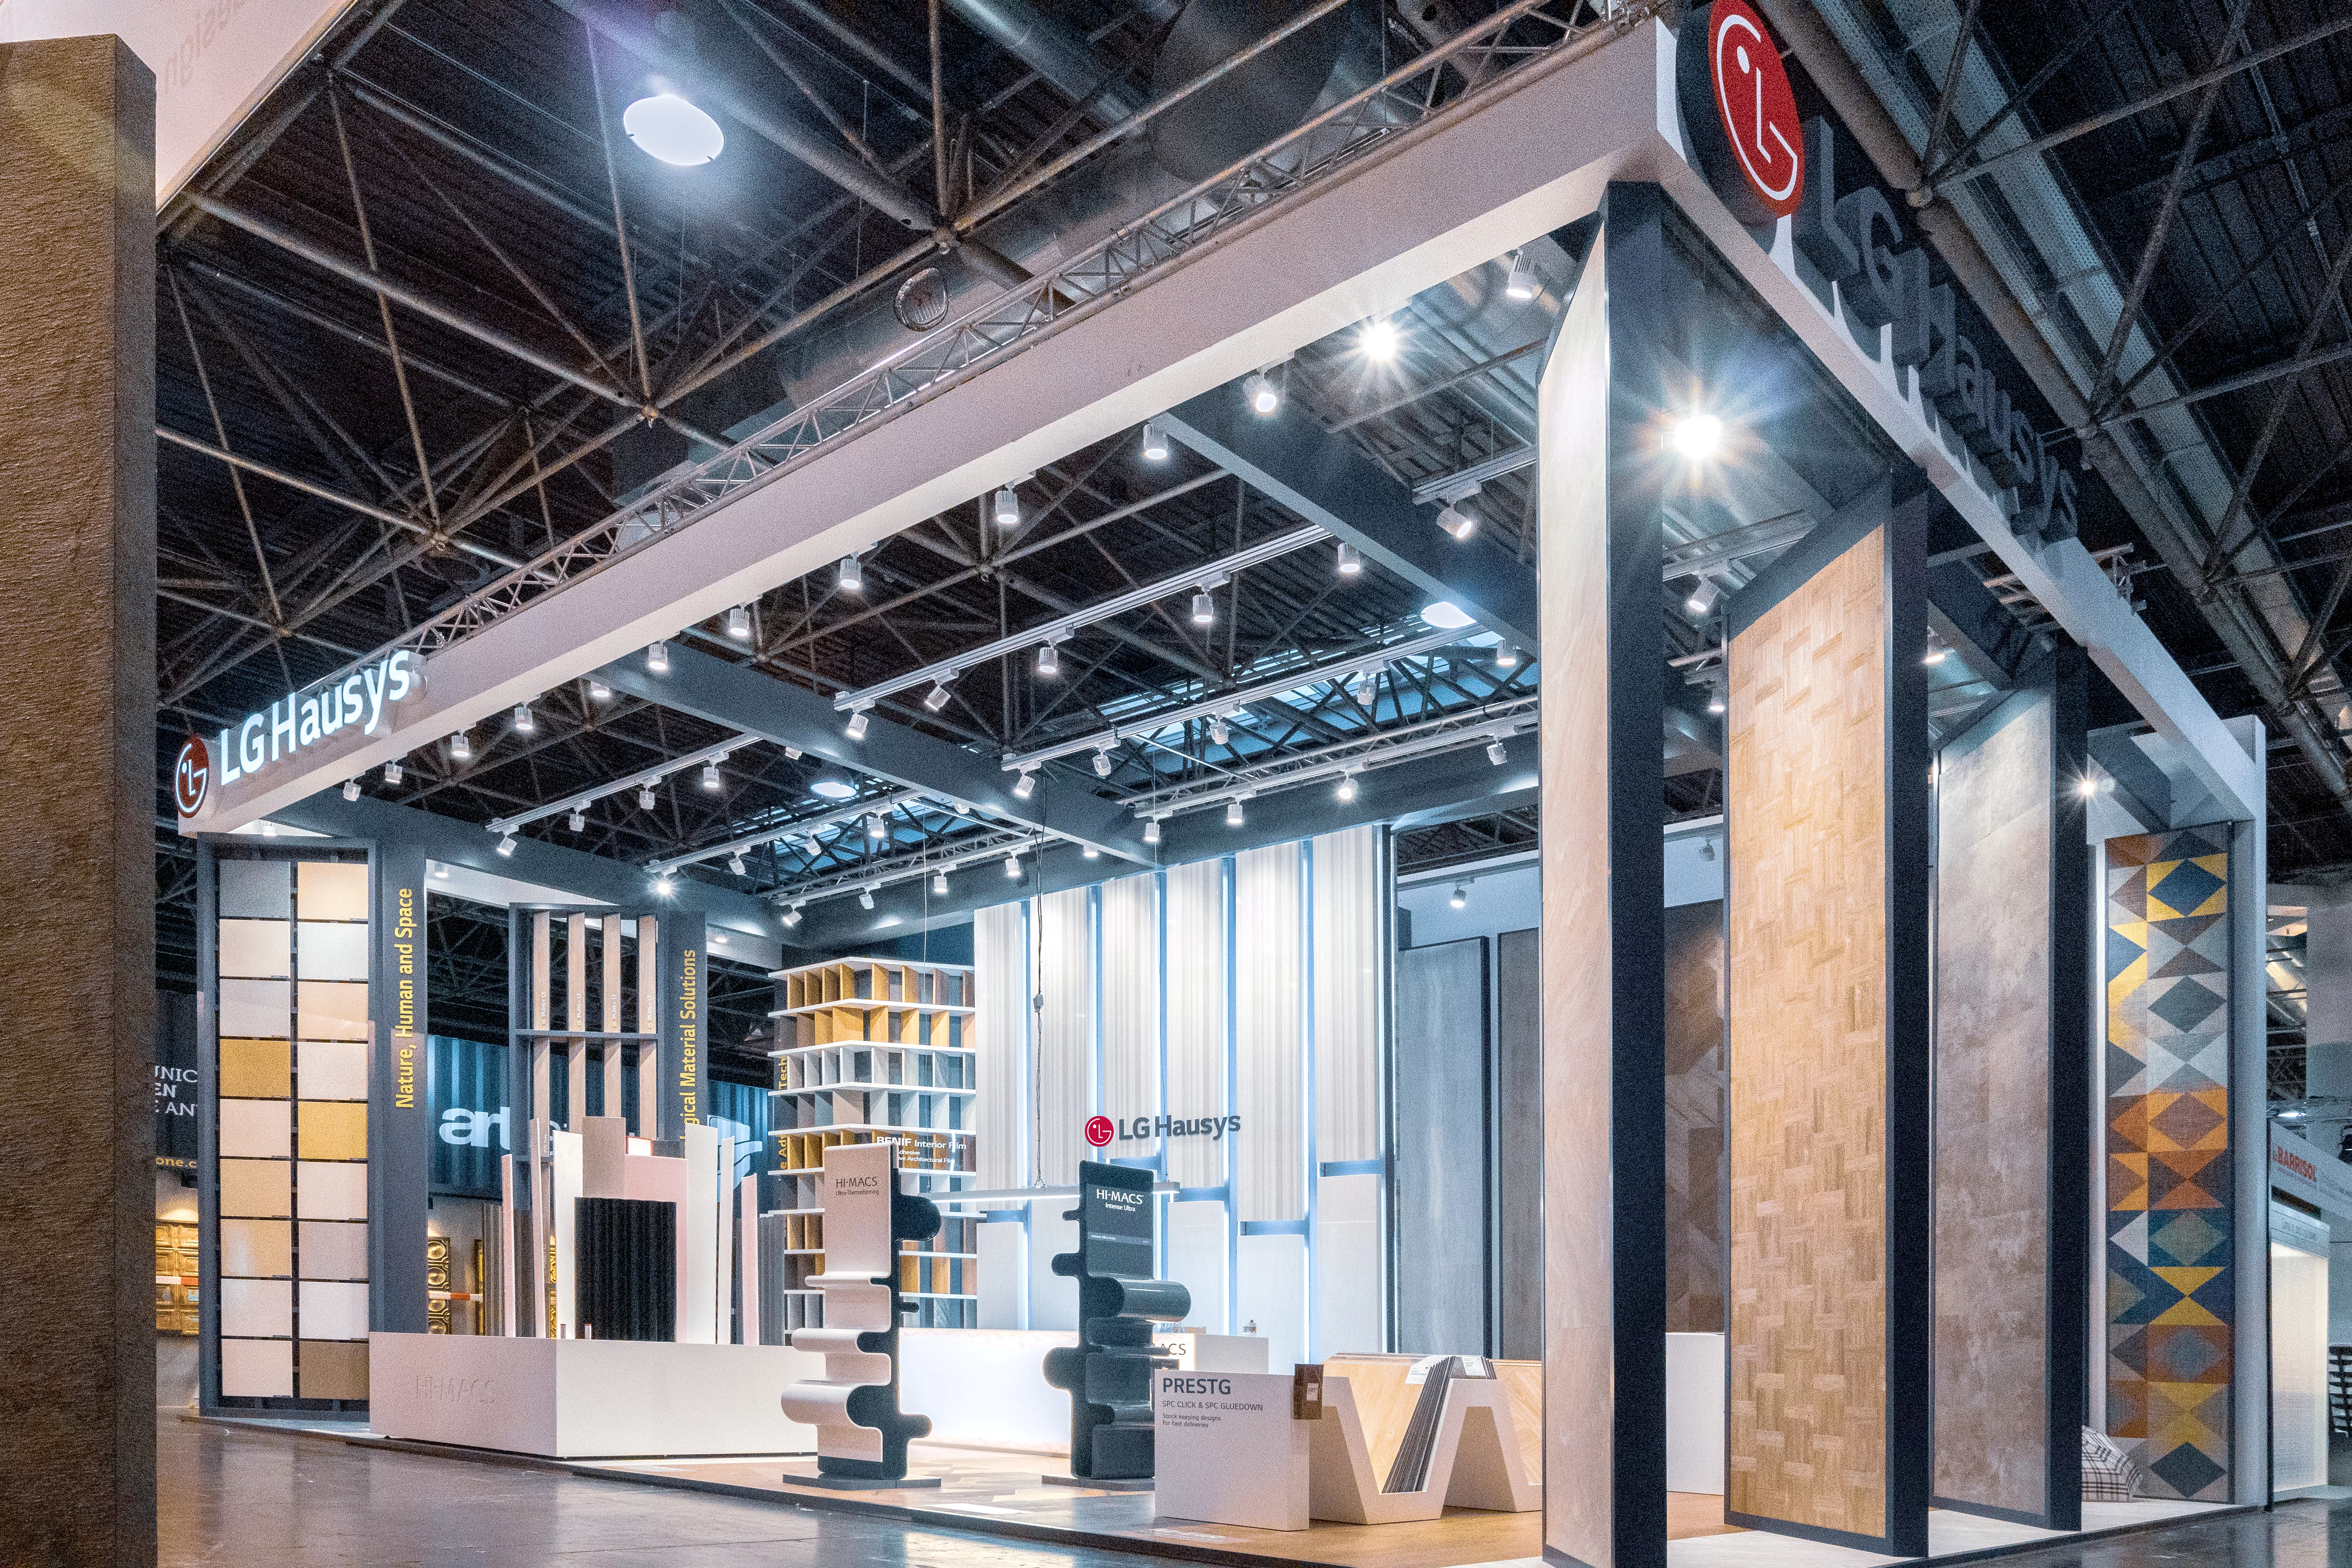 LX Hausys at EuroShop 2020: All the latest HIMACS innovations in one place